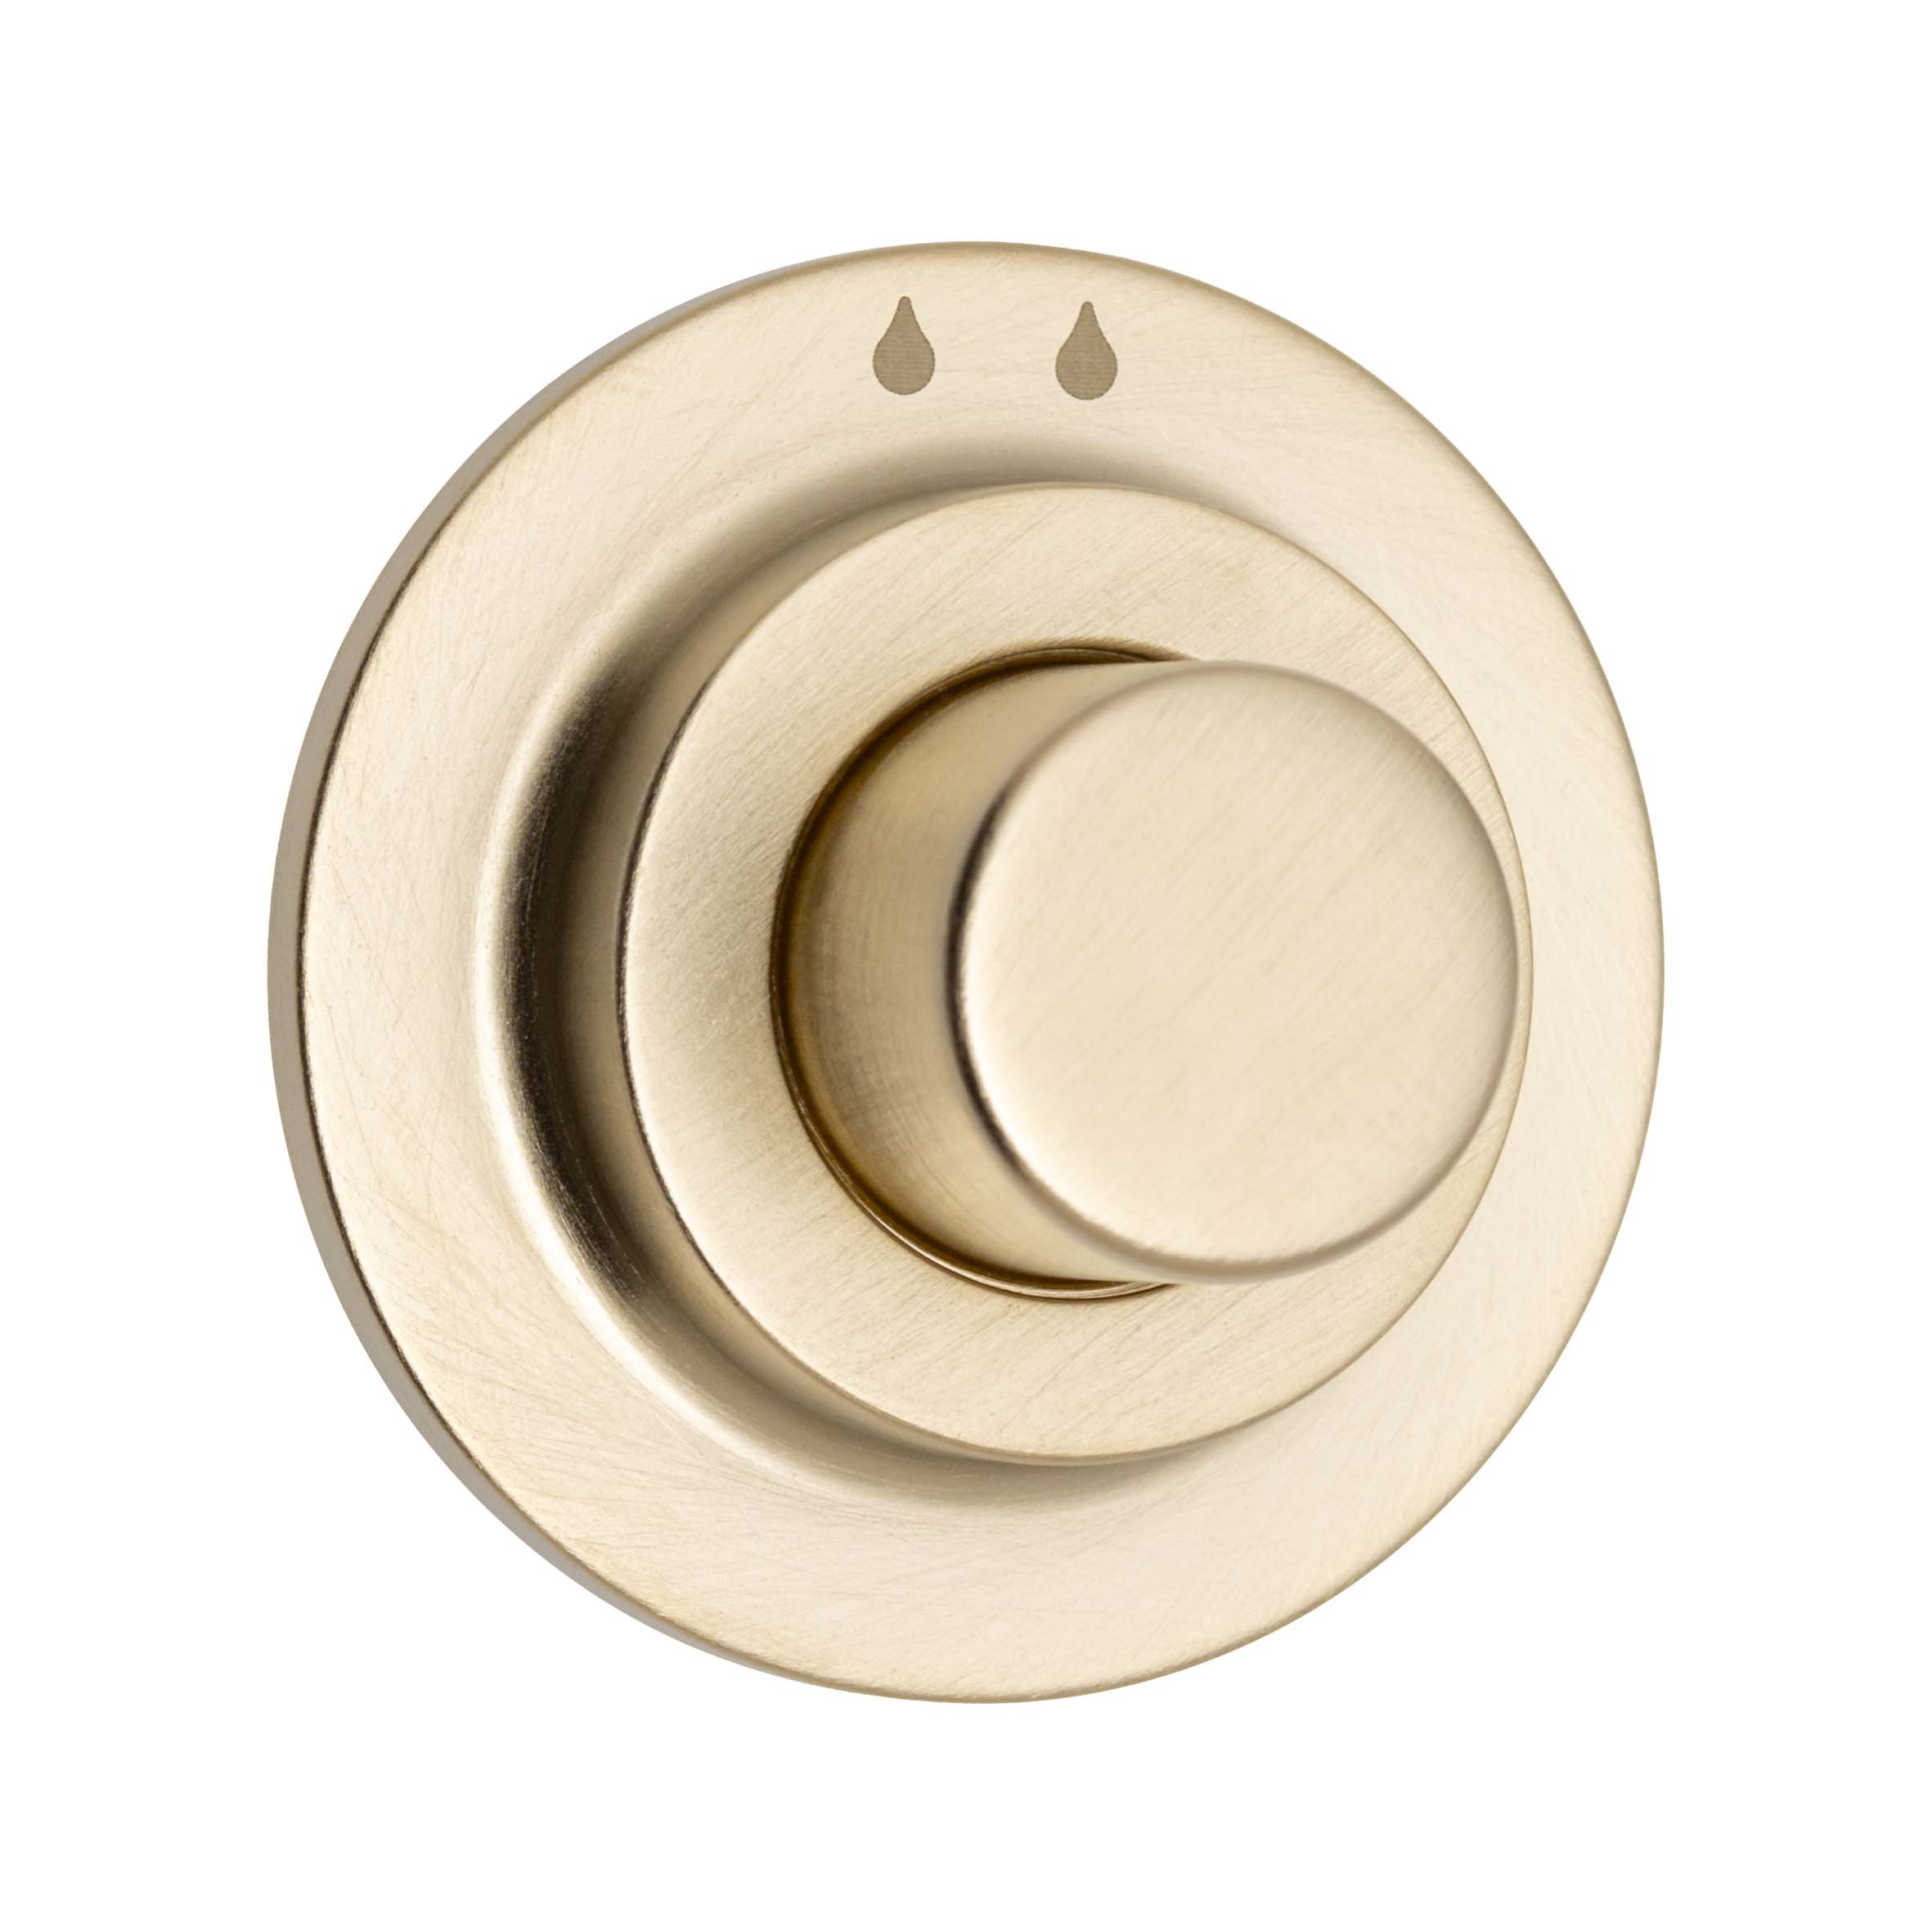 Base Material - Brushed Brass